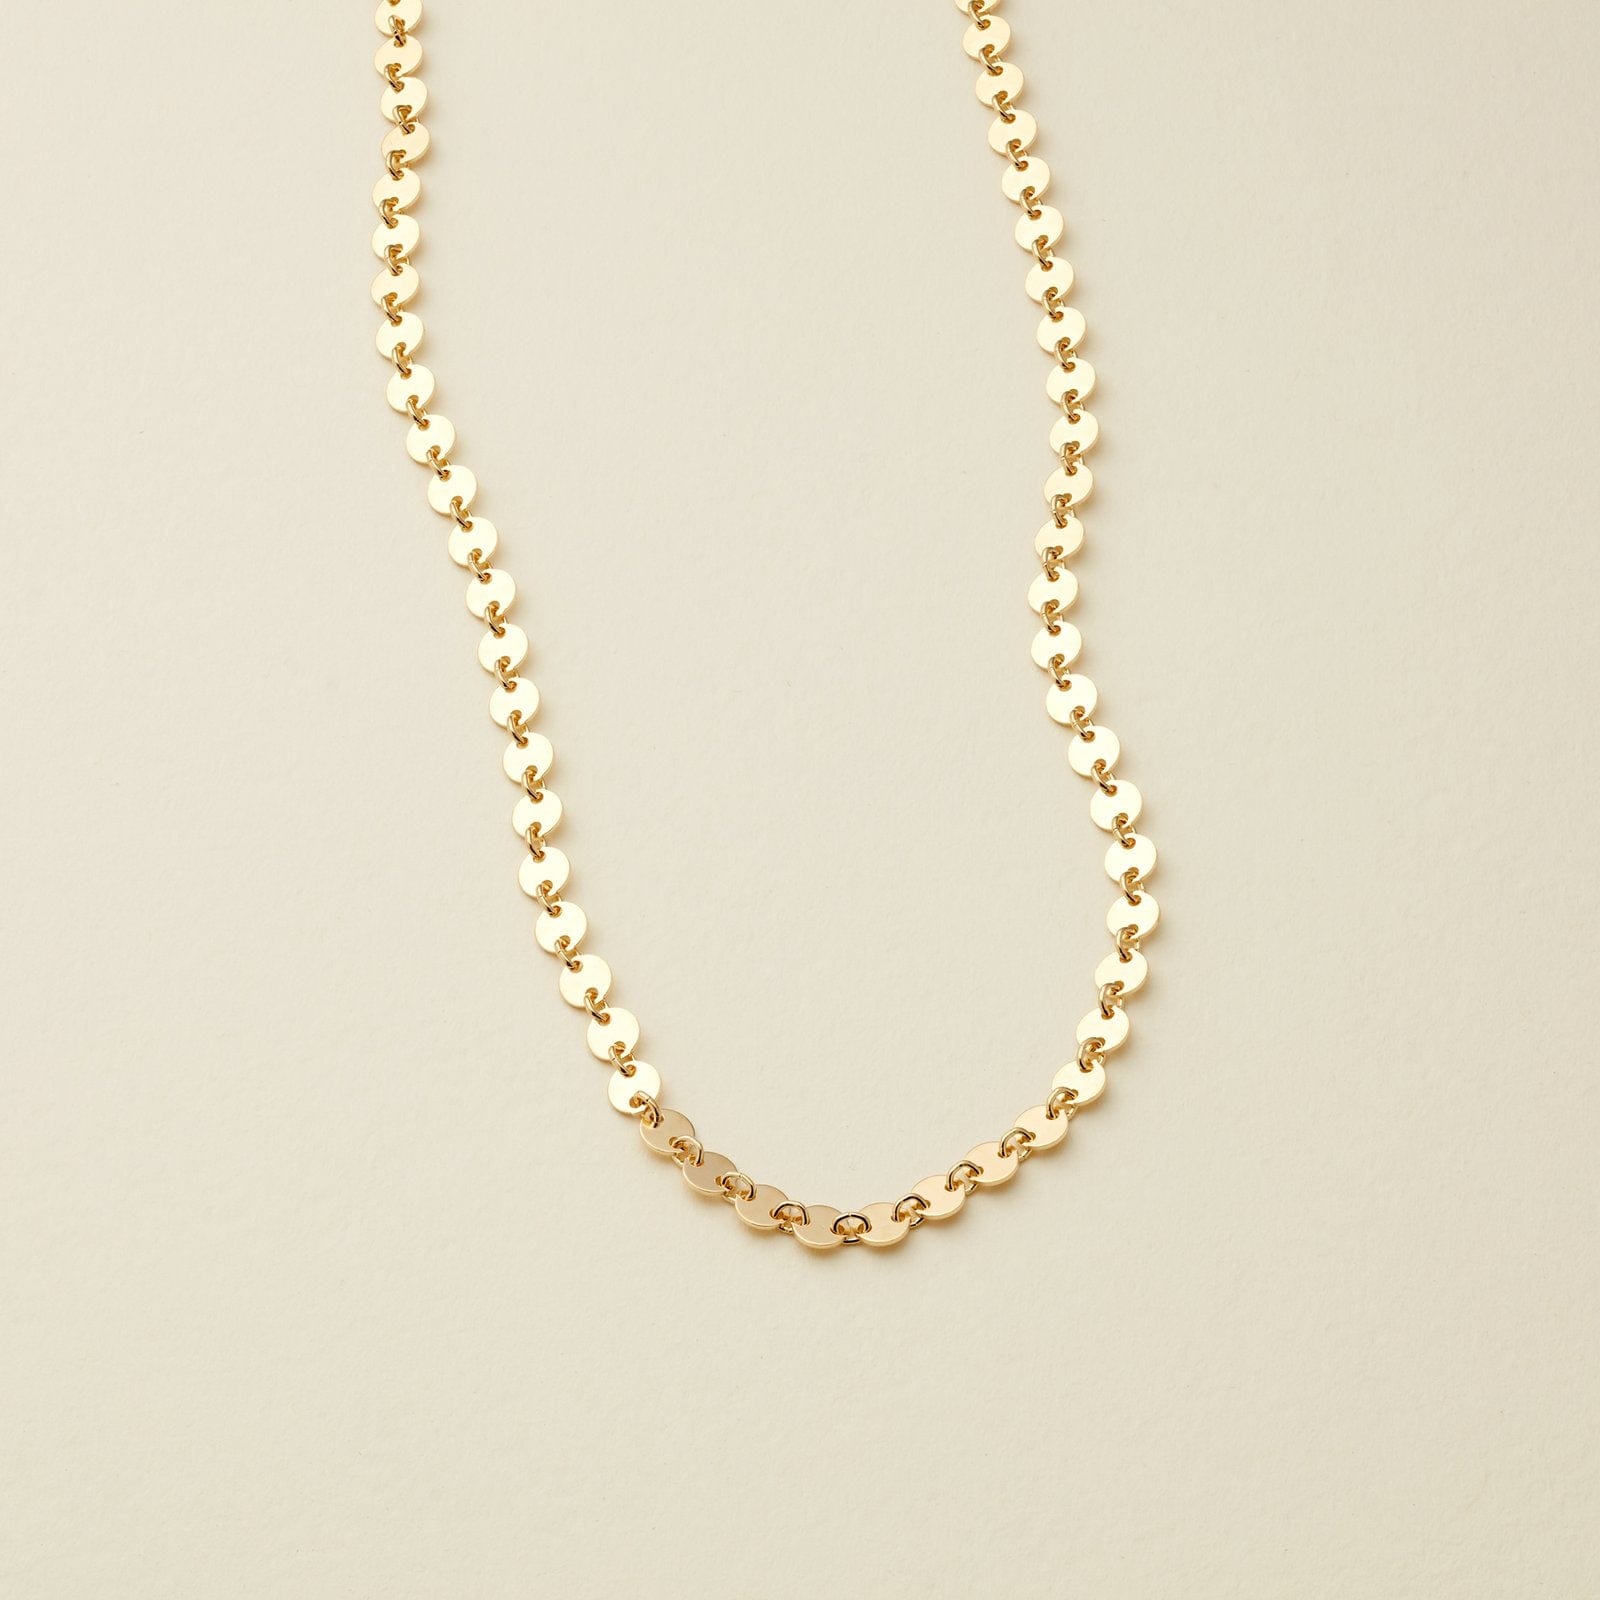 Poppy Necklace | The Little's Collection Necklace